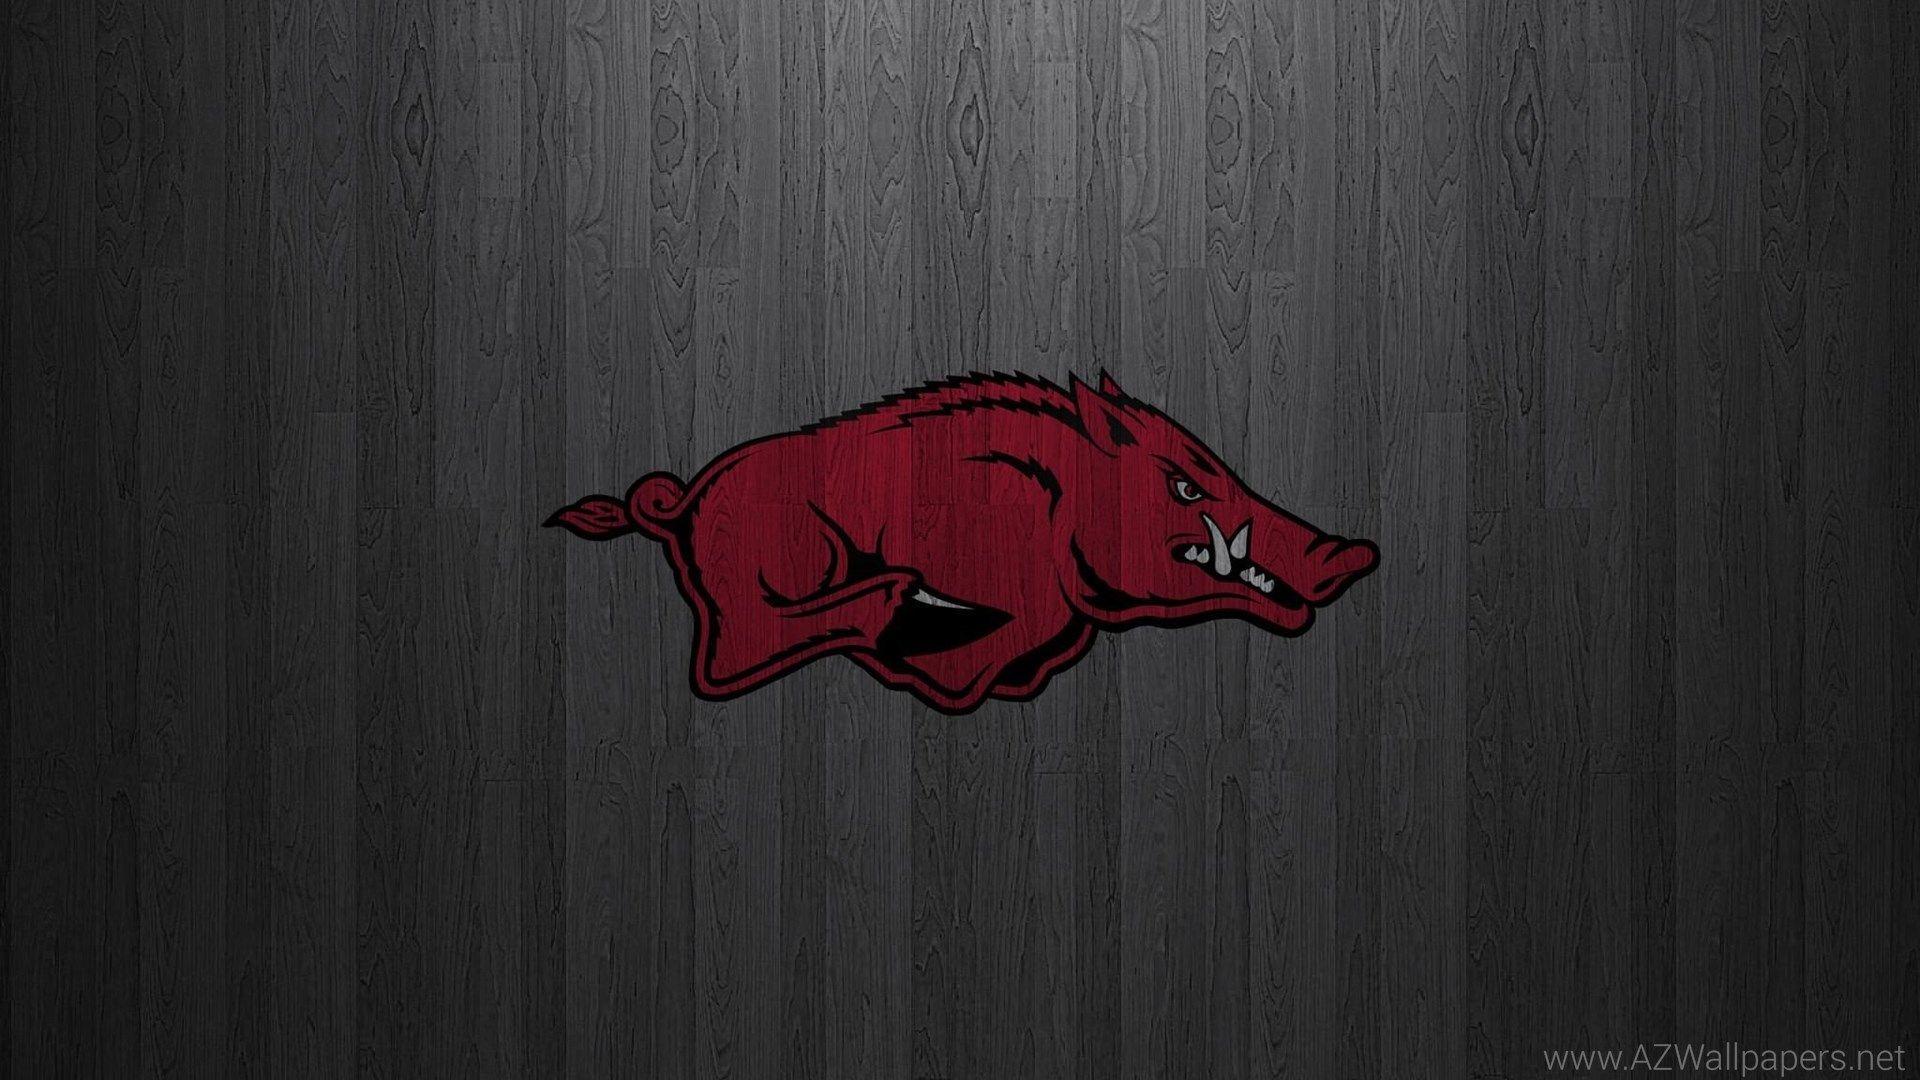 Download wallpapers arkansas razorbacks for desktop free High Quality HD  pictures wallpapers  Page 1